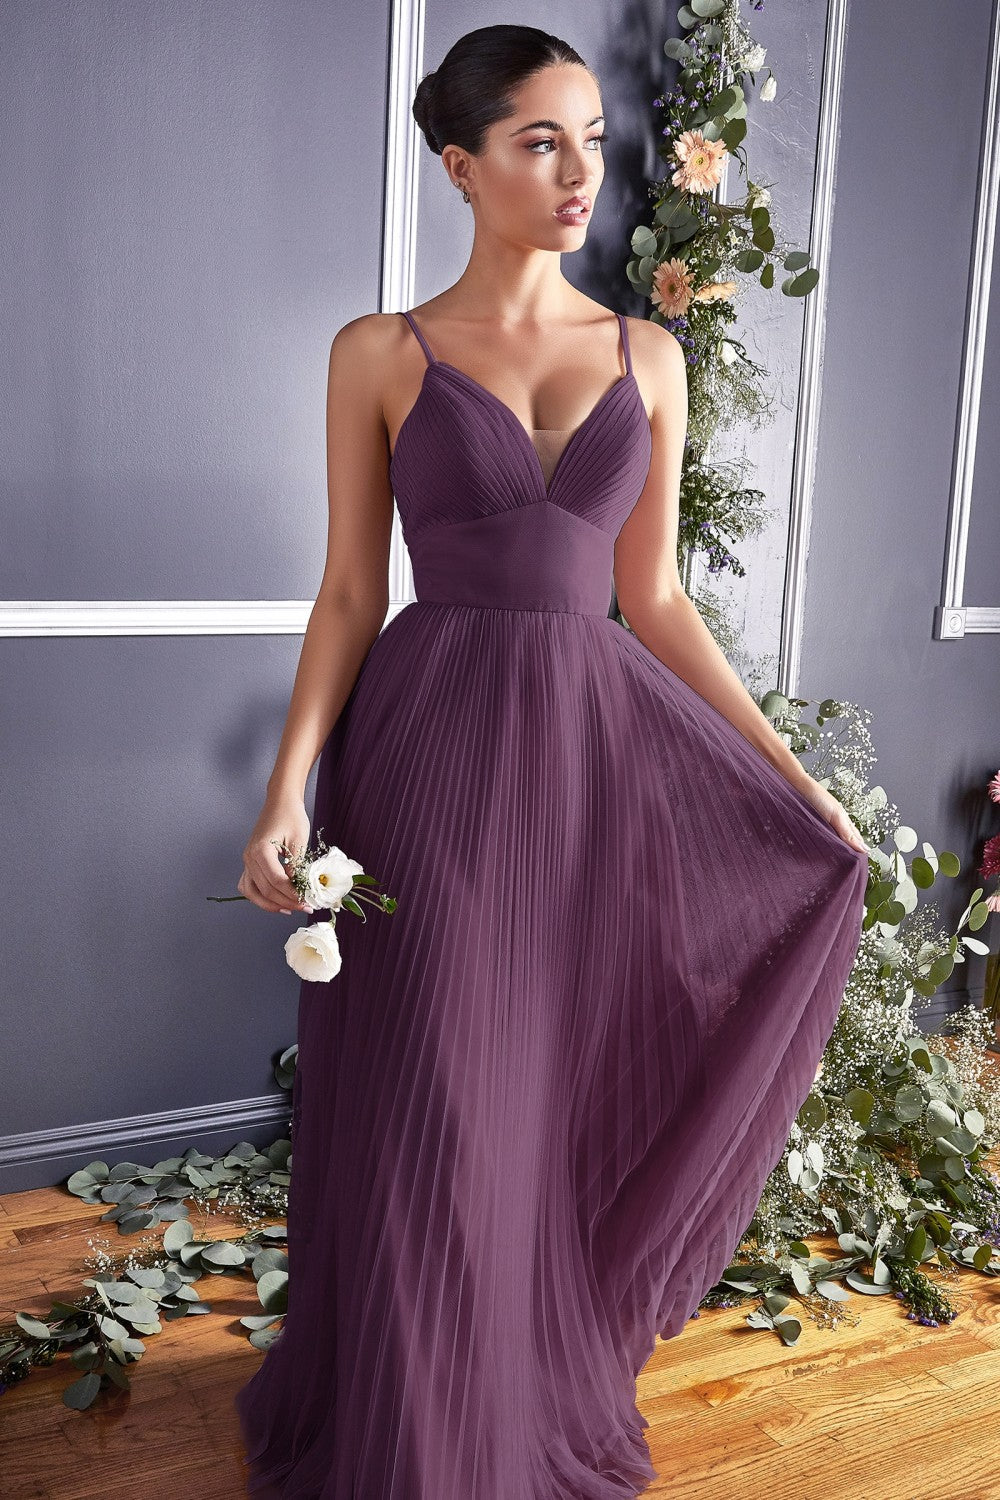 Sweetheart Neckline A-Line Tulle Dress by Cinderella Divine - CD184 - Special Occasion/Curves